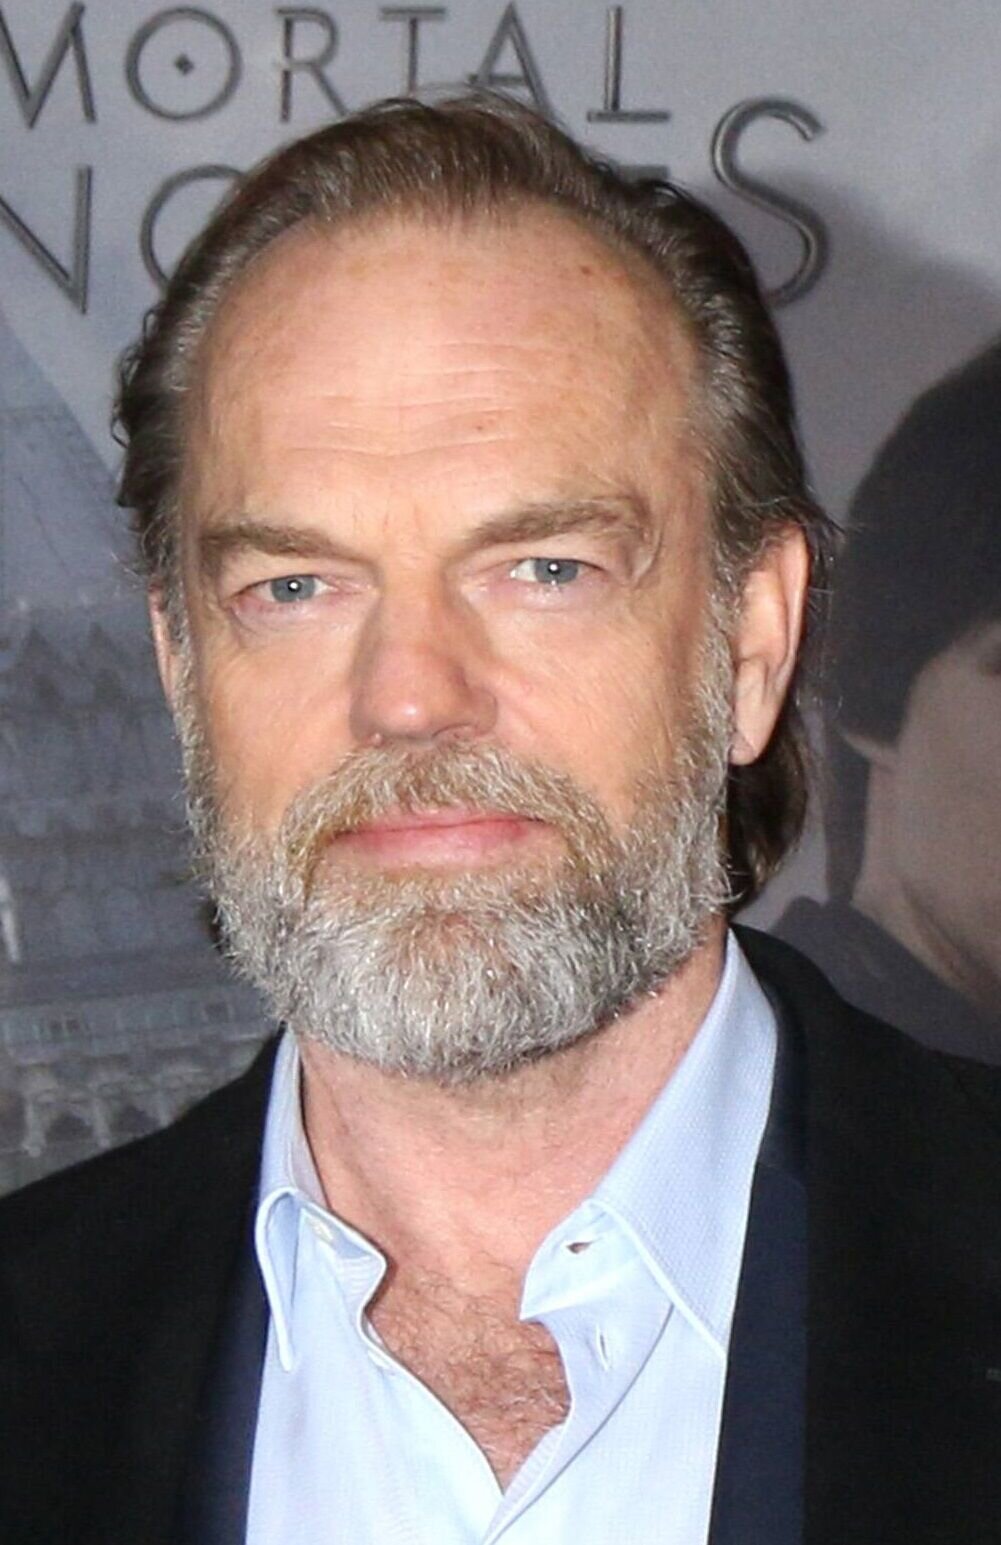 Slow Horses casts Lord of the Rings' Hugo Weaving for season 4